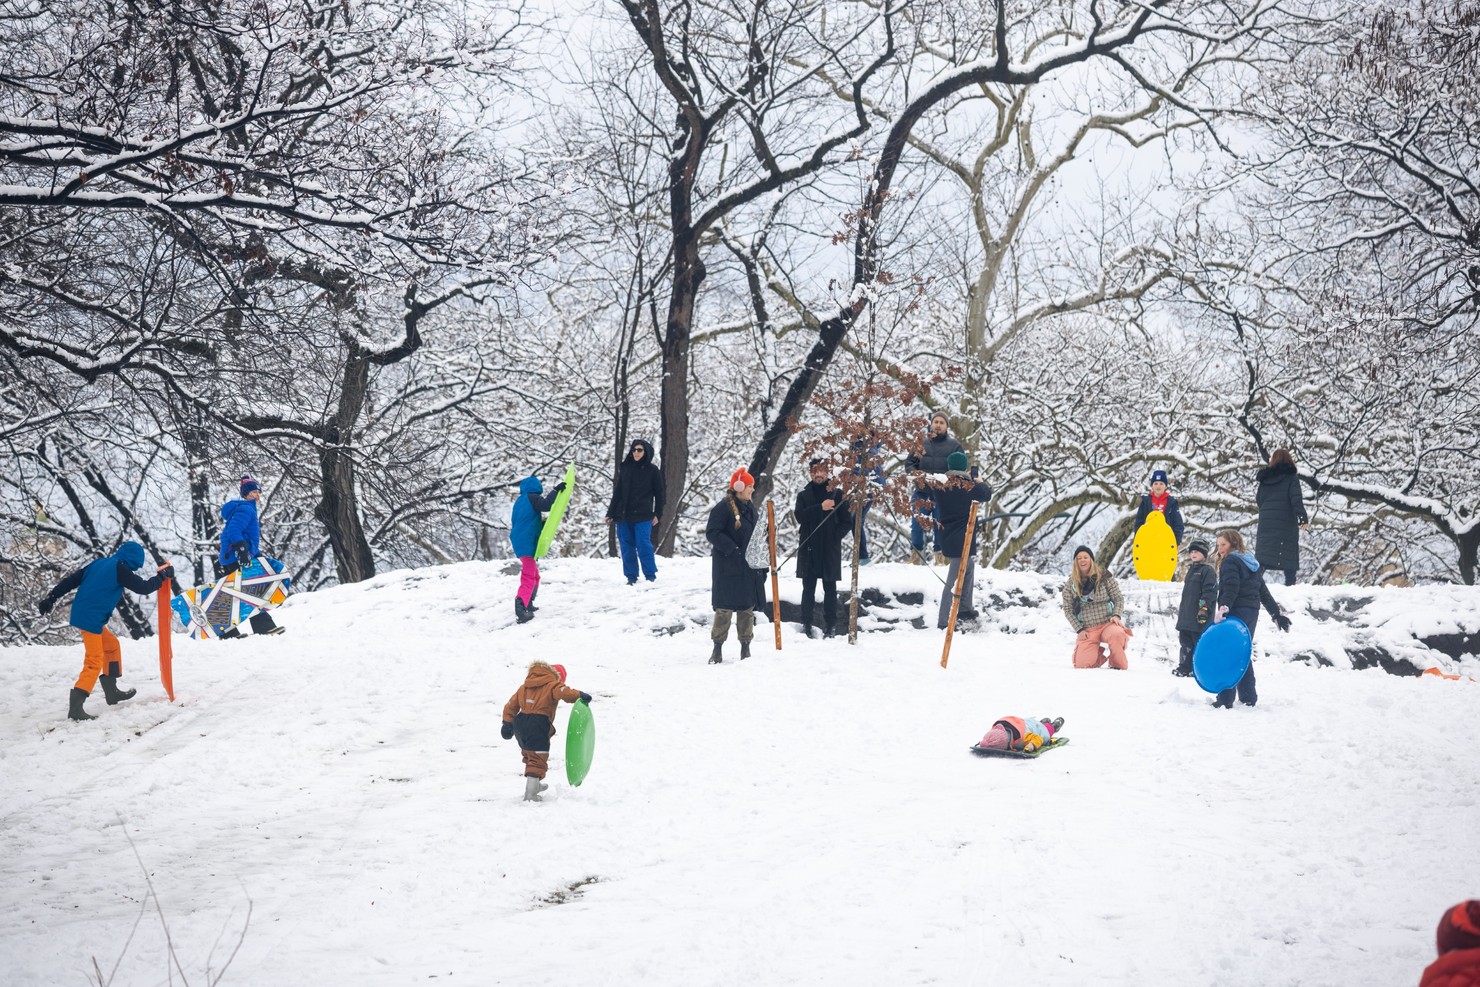 Several people at the top of a hill in Central Park carrying sleds.